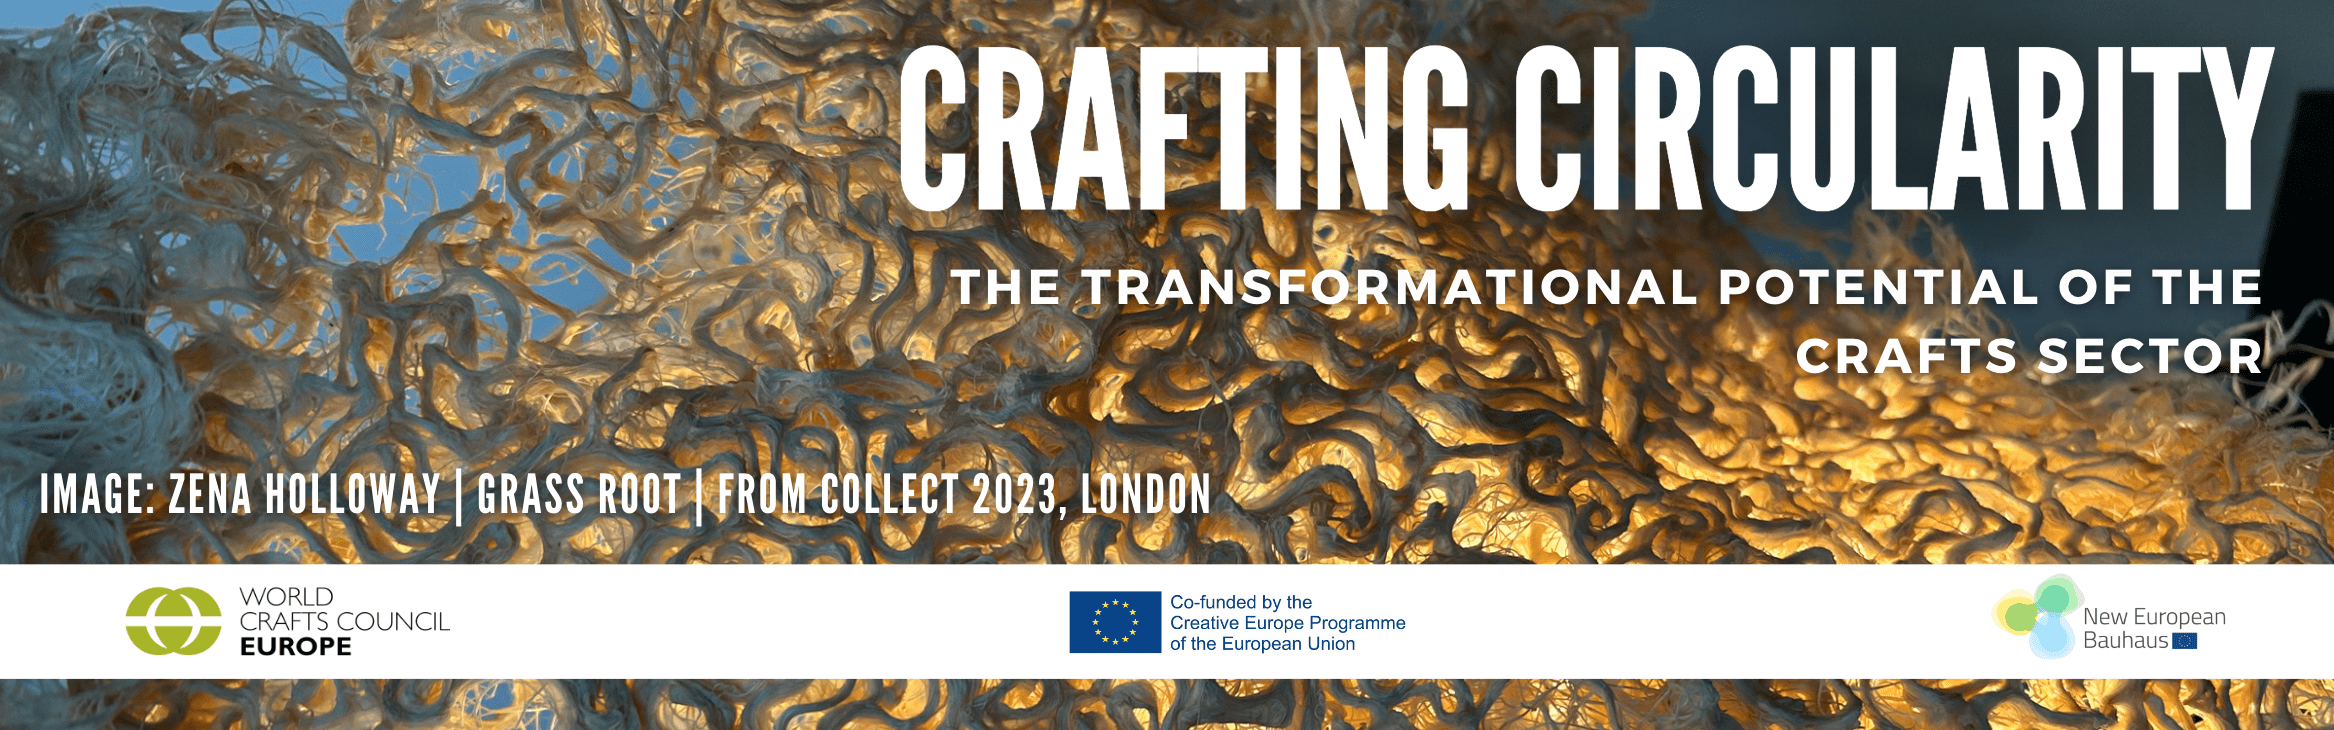 Crafting Circularity: The Transformational Potential of the Crafts Sector